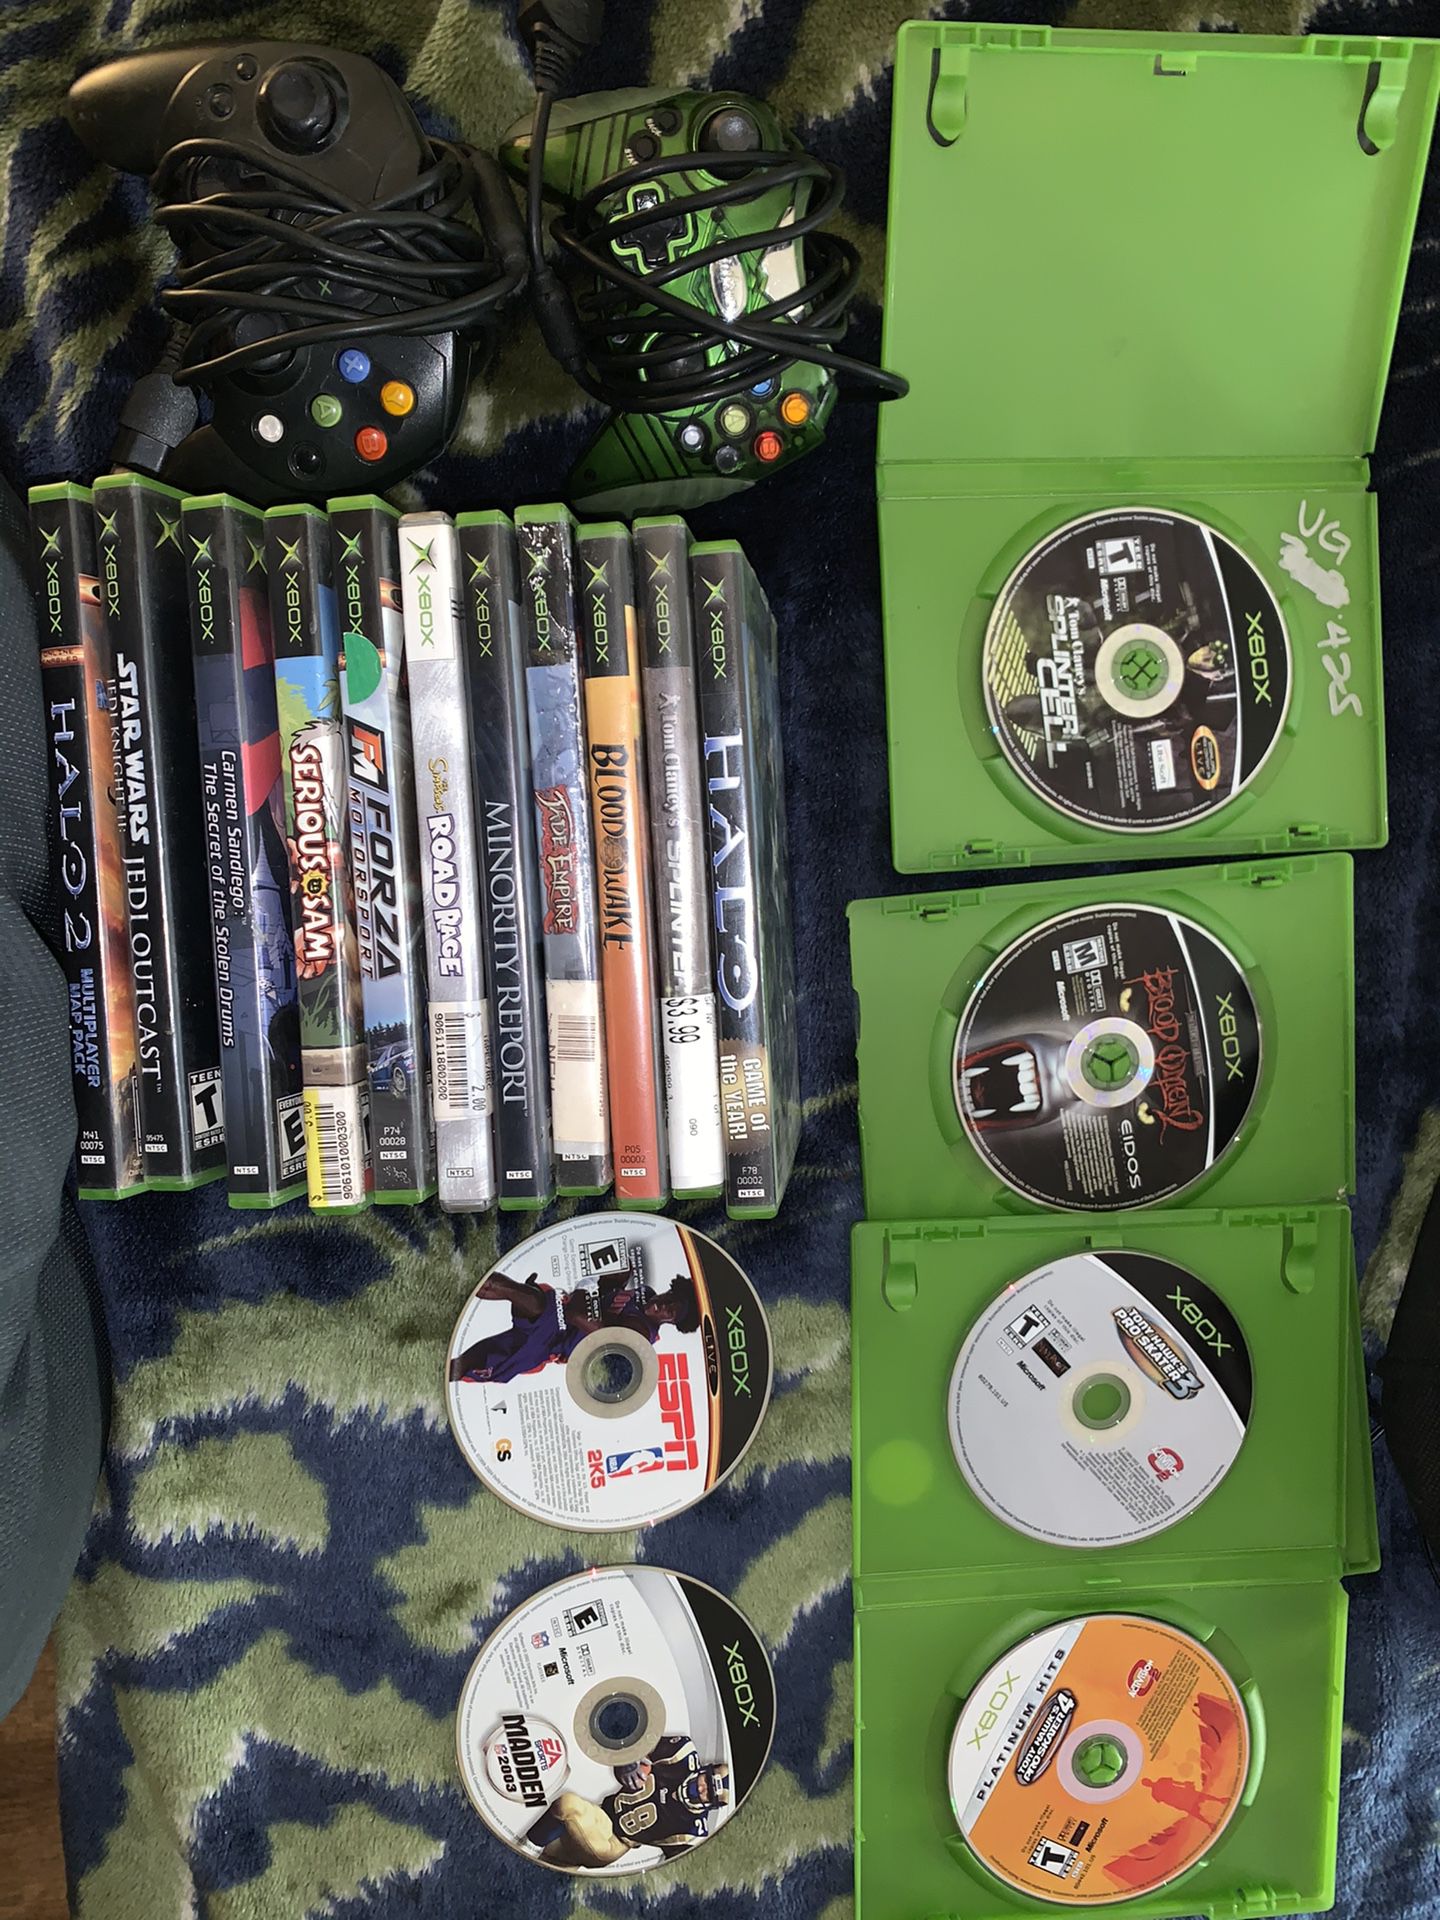 Original Xbox and 360 games and accessories